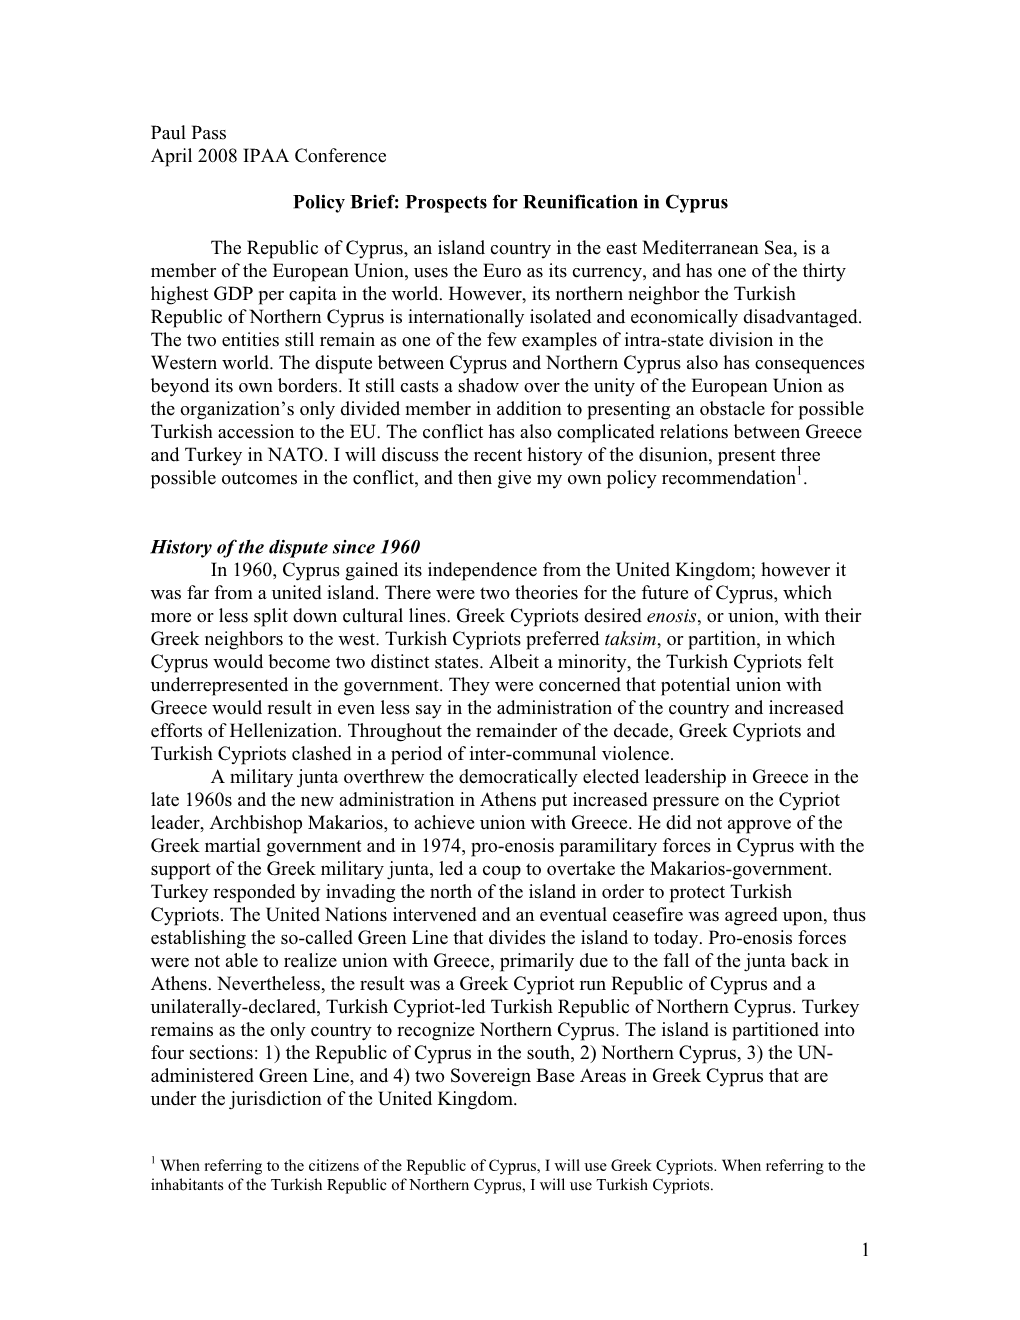 Paul Pass April 2008 IPAA Conference Policy Brief: Prospects for Reunification in Cyprus the Republic of Cyprus, an Island Count